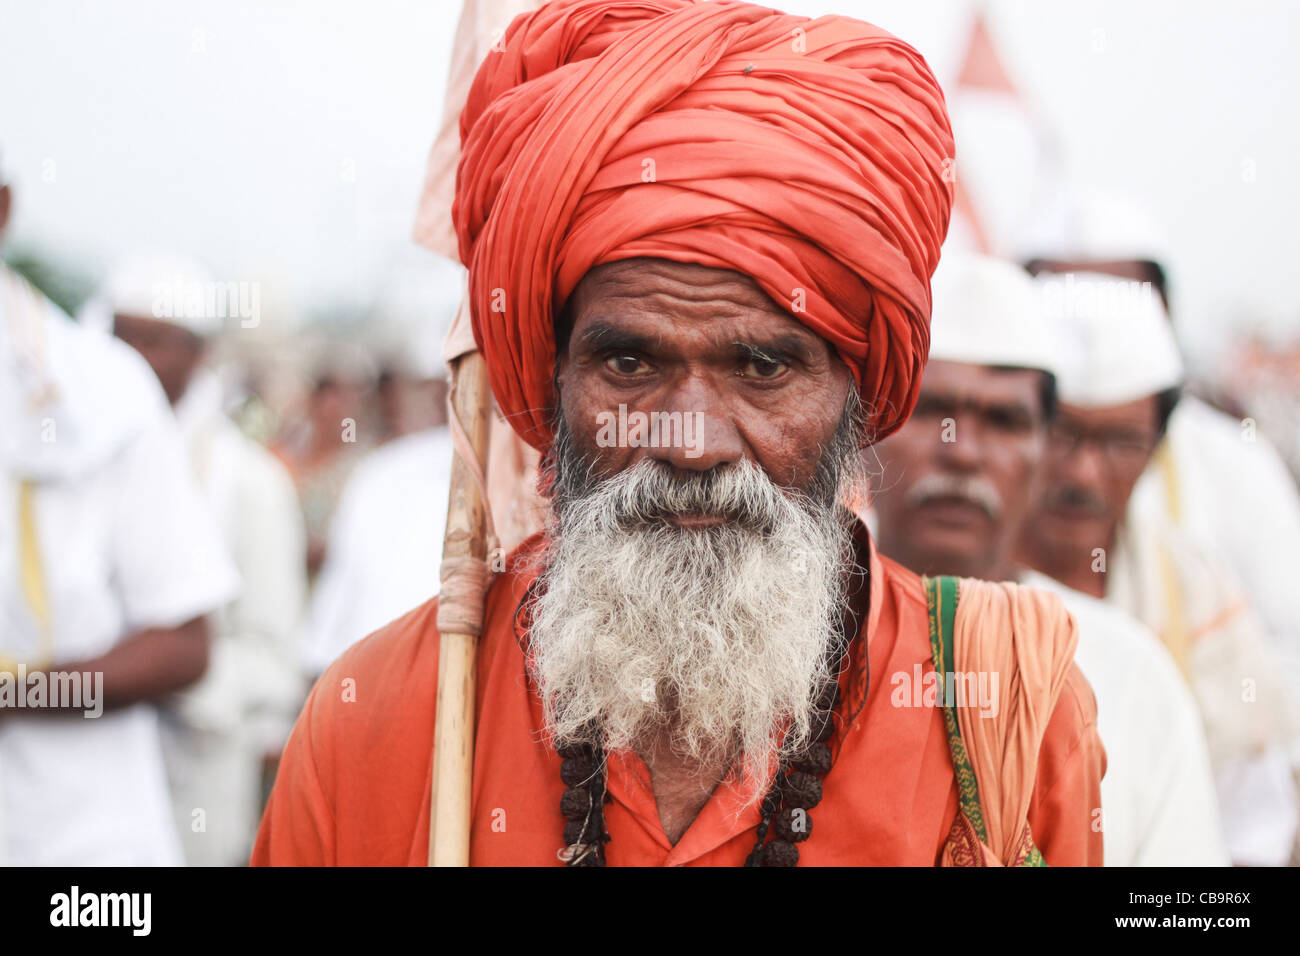 this man is part of  annual dindi , yatra , towards Pandharpur's Vittal mandir, the group walks from Pune almost 25 days . Stock Photo